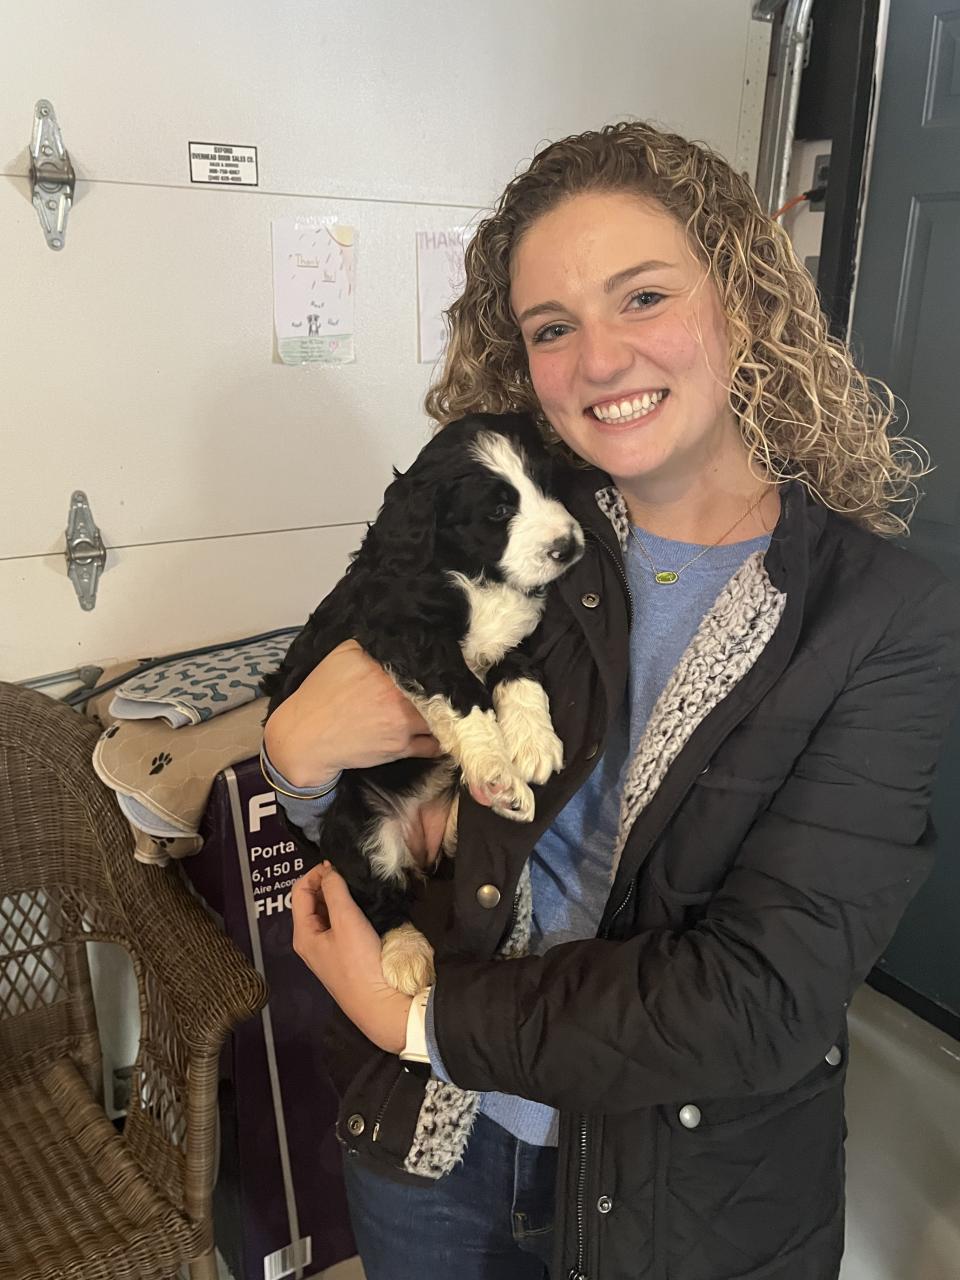 Alexandria "Lexi" Fata with Gracie, a Bernedoodle she says she adopted in order to become a therapy dog for Ann Arbor Public Schools. Fata is now suing after she claims Ann Arbor administrators stole Gracie from her in a battle over ownership.